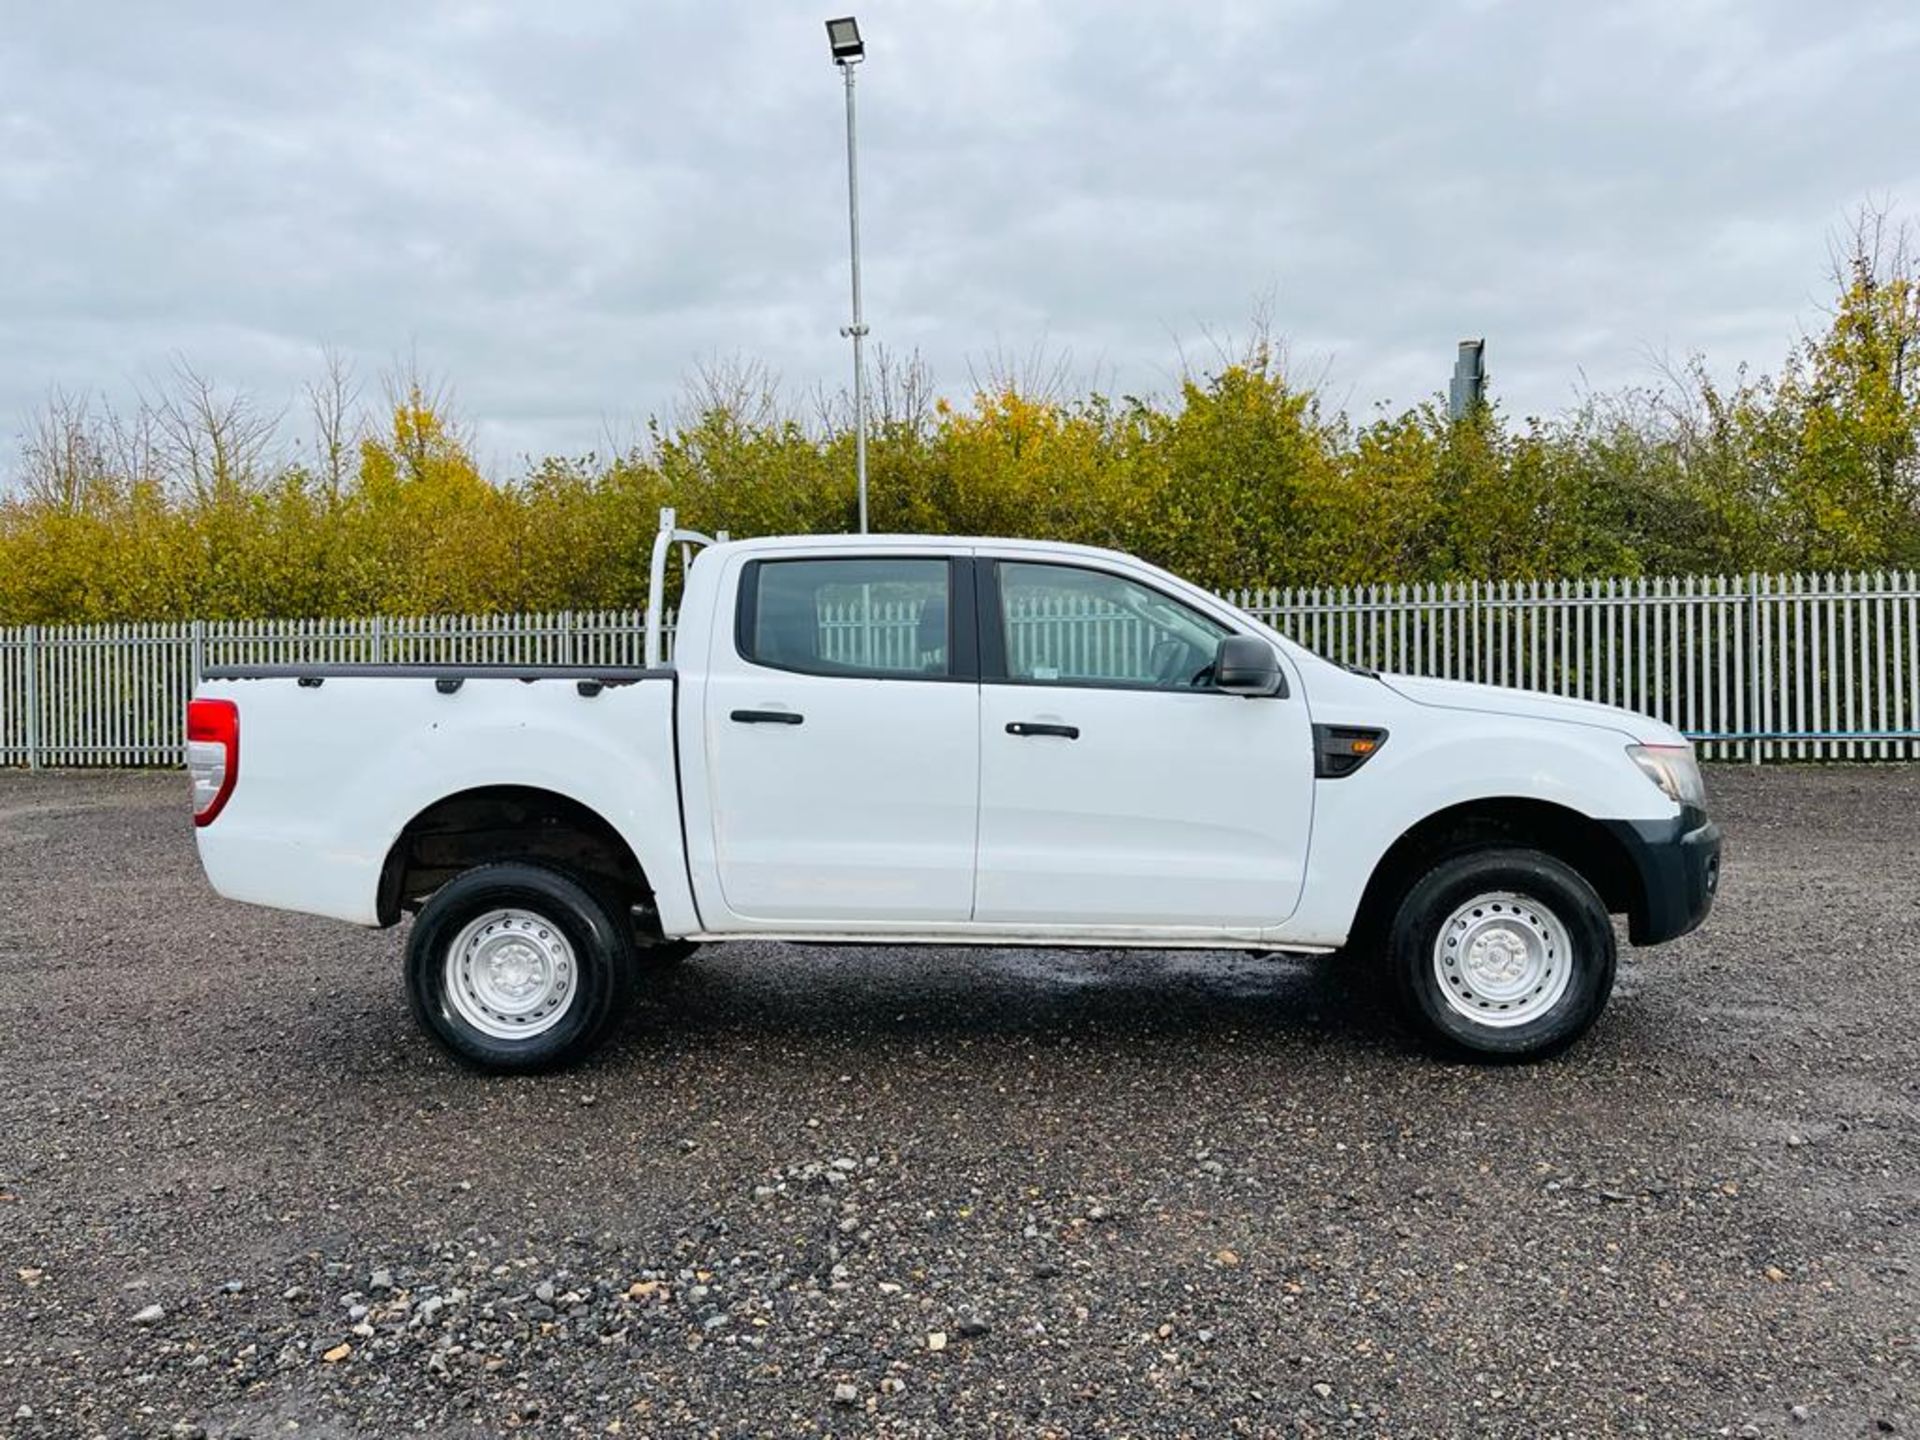 ** ON SALE ** Ford Ranger 2.2 TDCI XL 4WD 150 2015 '65 Reg' - A/C - 33,789 Miles Only - No Vat - Image 4 of 23